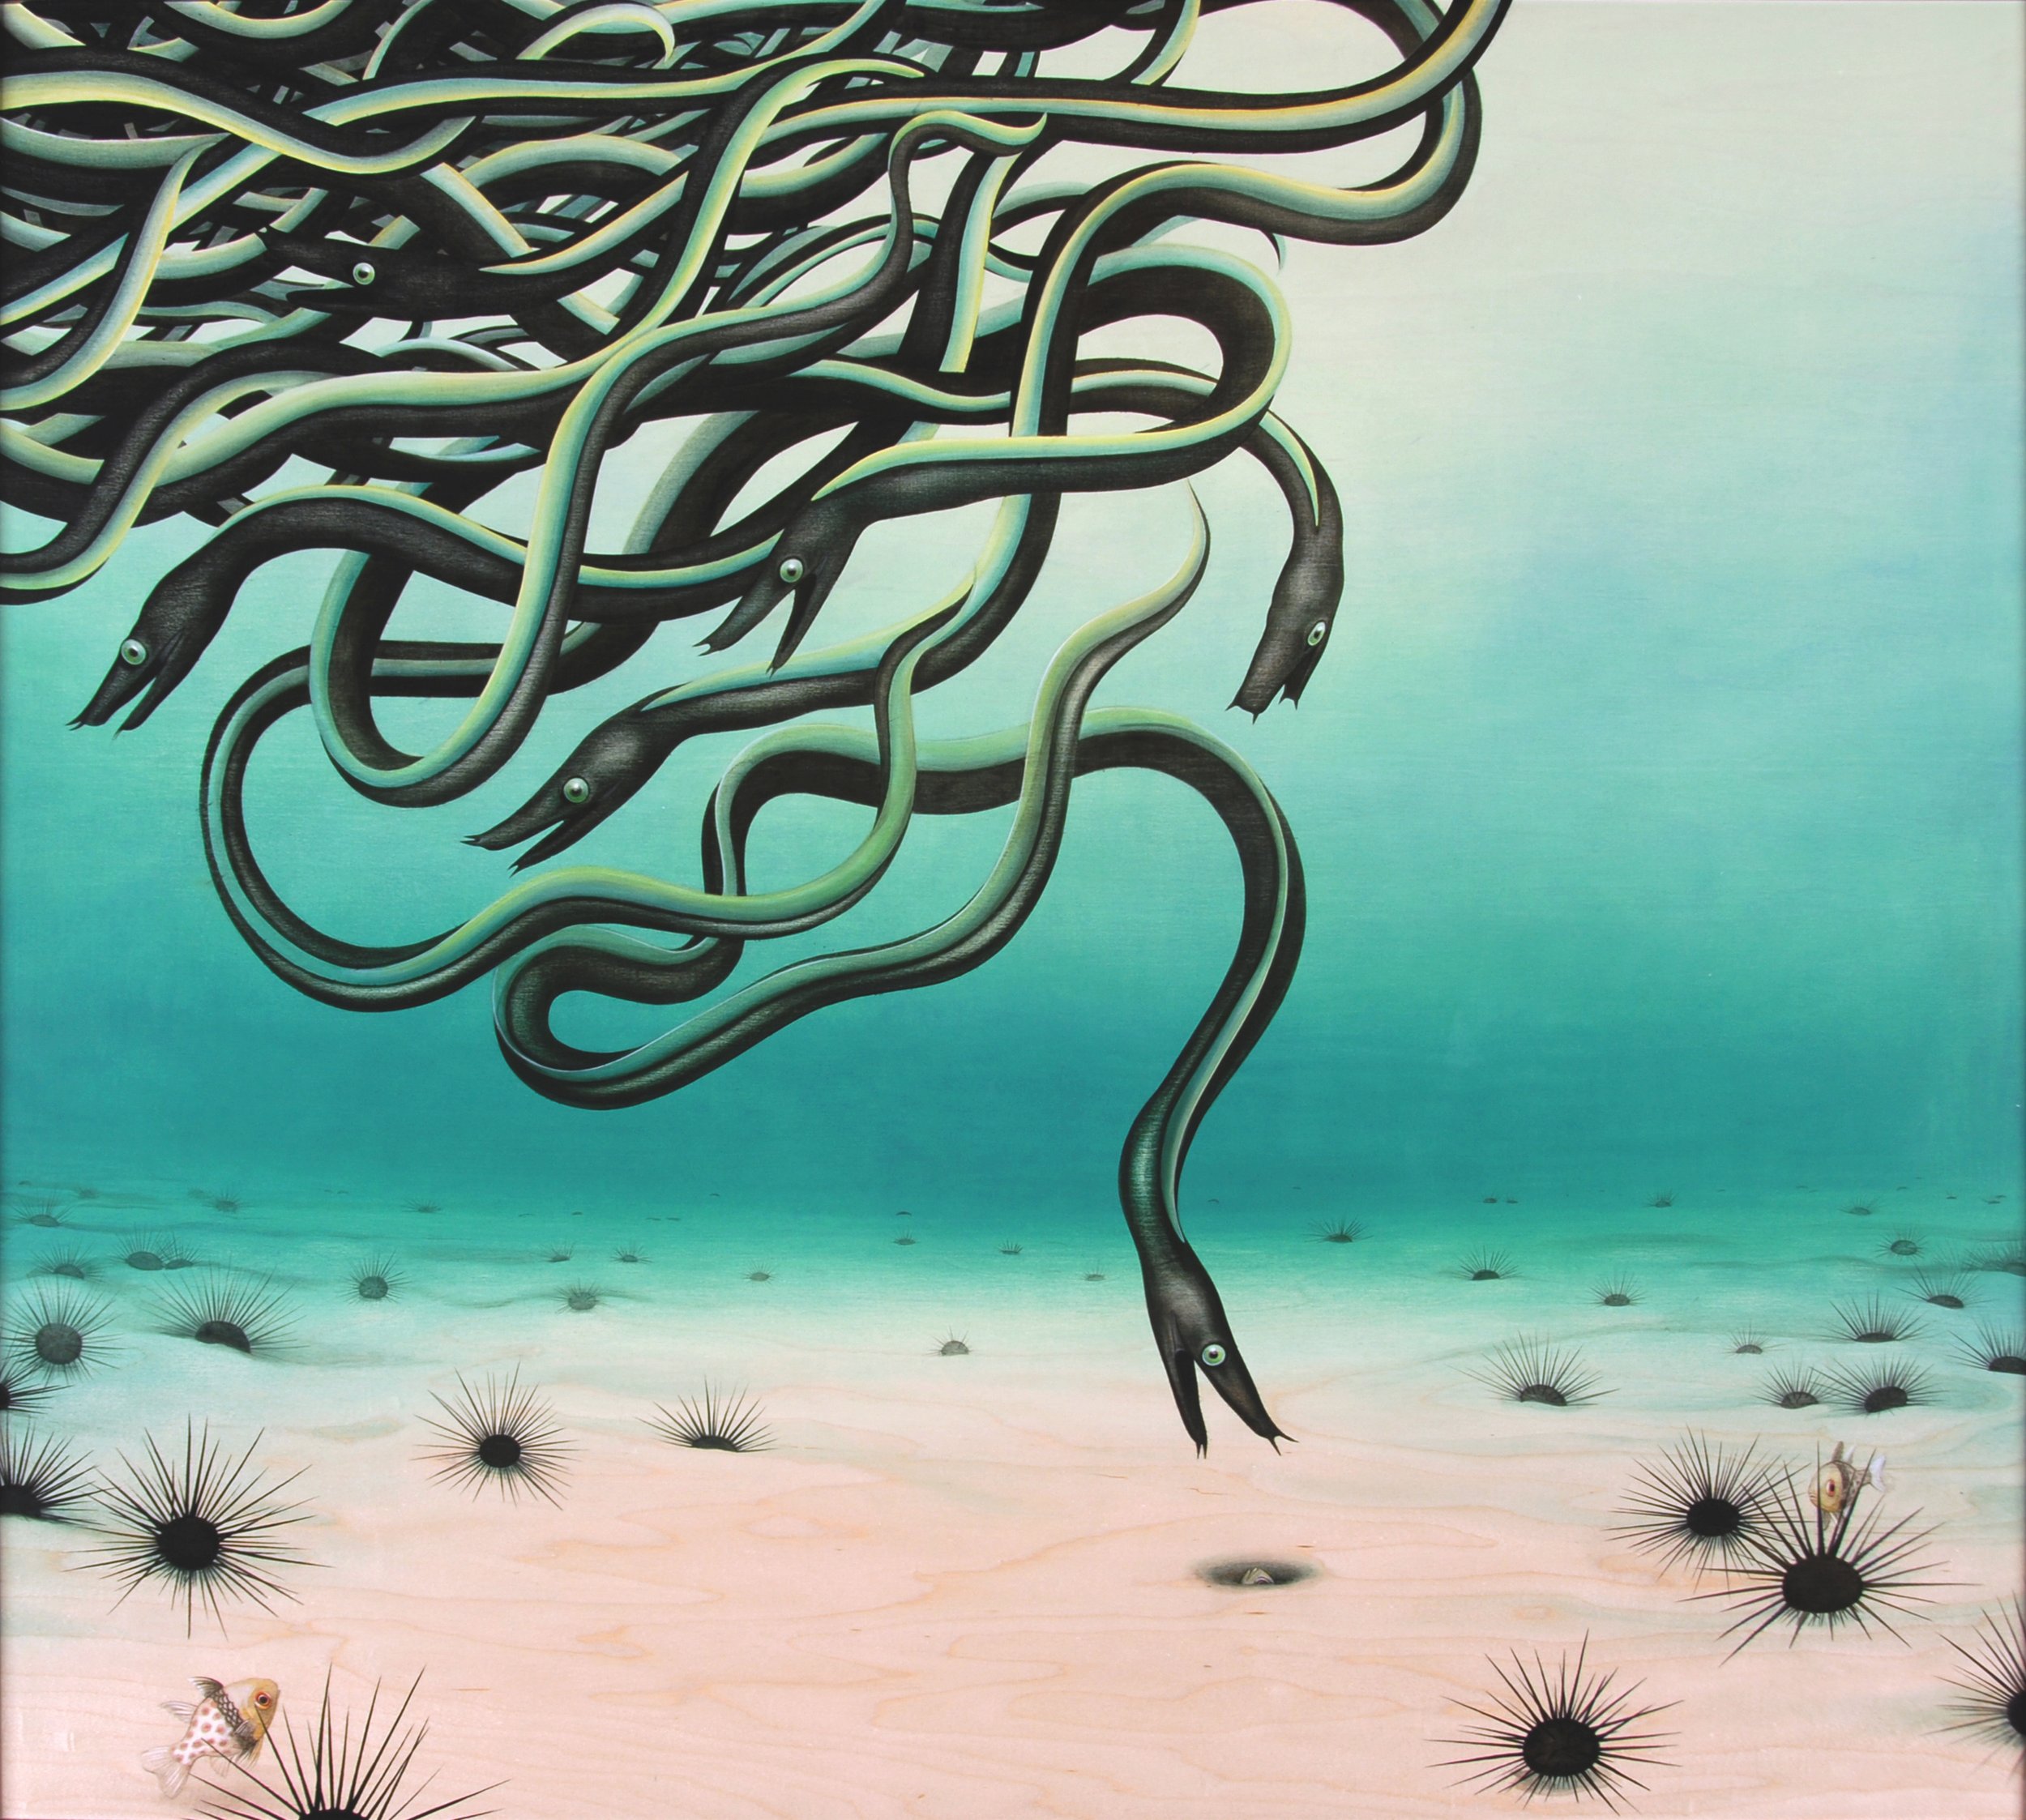 Ribbon Eels,  45 x 40 inches, acrylic on maple panel, 2007